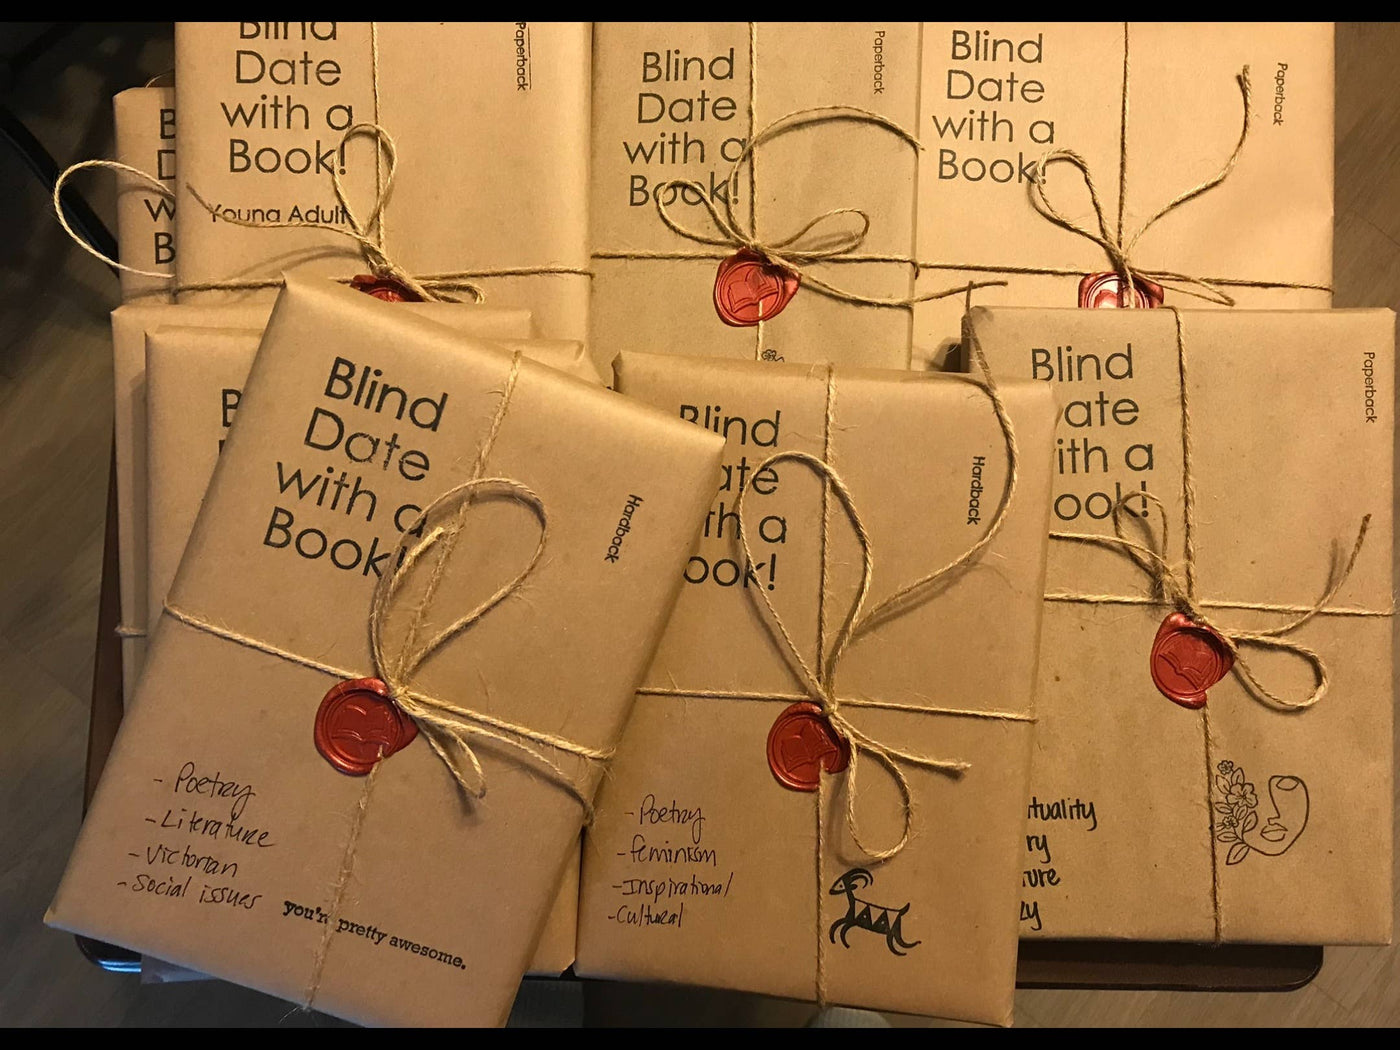 Blind Date With a Book-SELF HELP, MOTIVATION